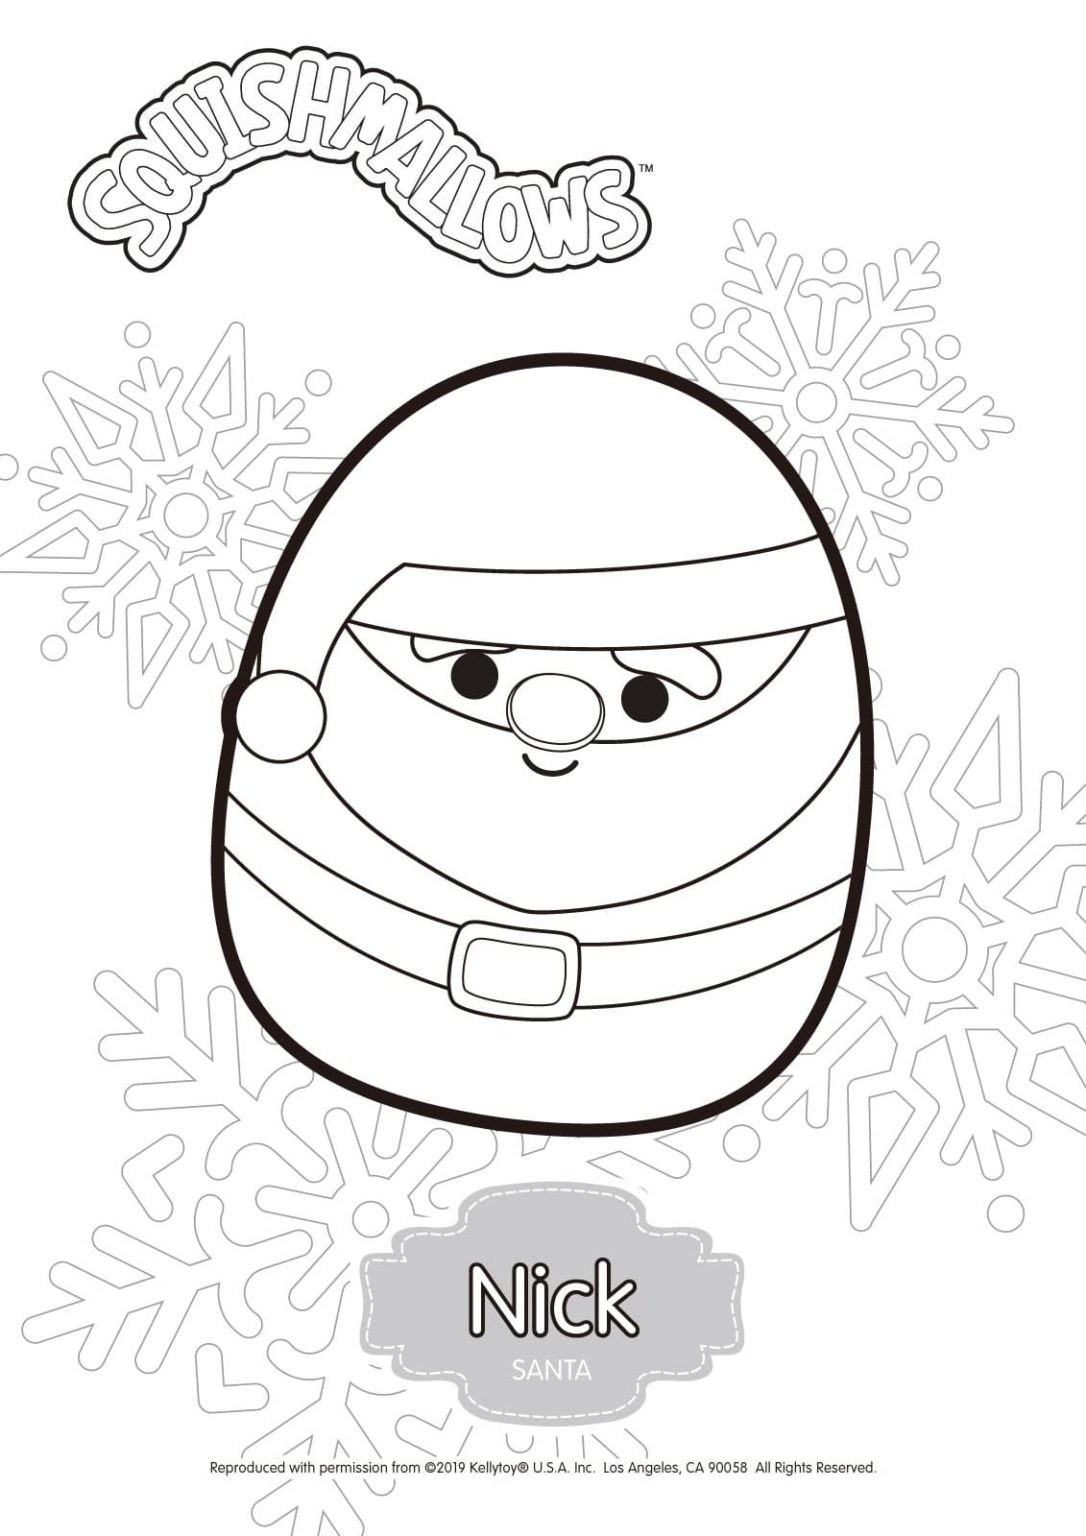 squishmallows coloring pages printable coloring pages